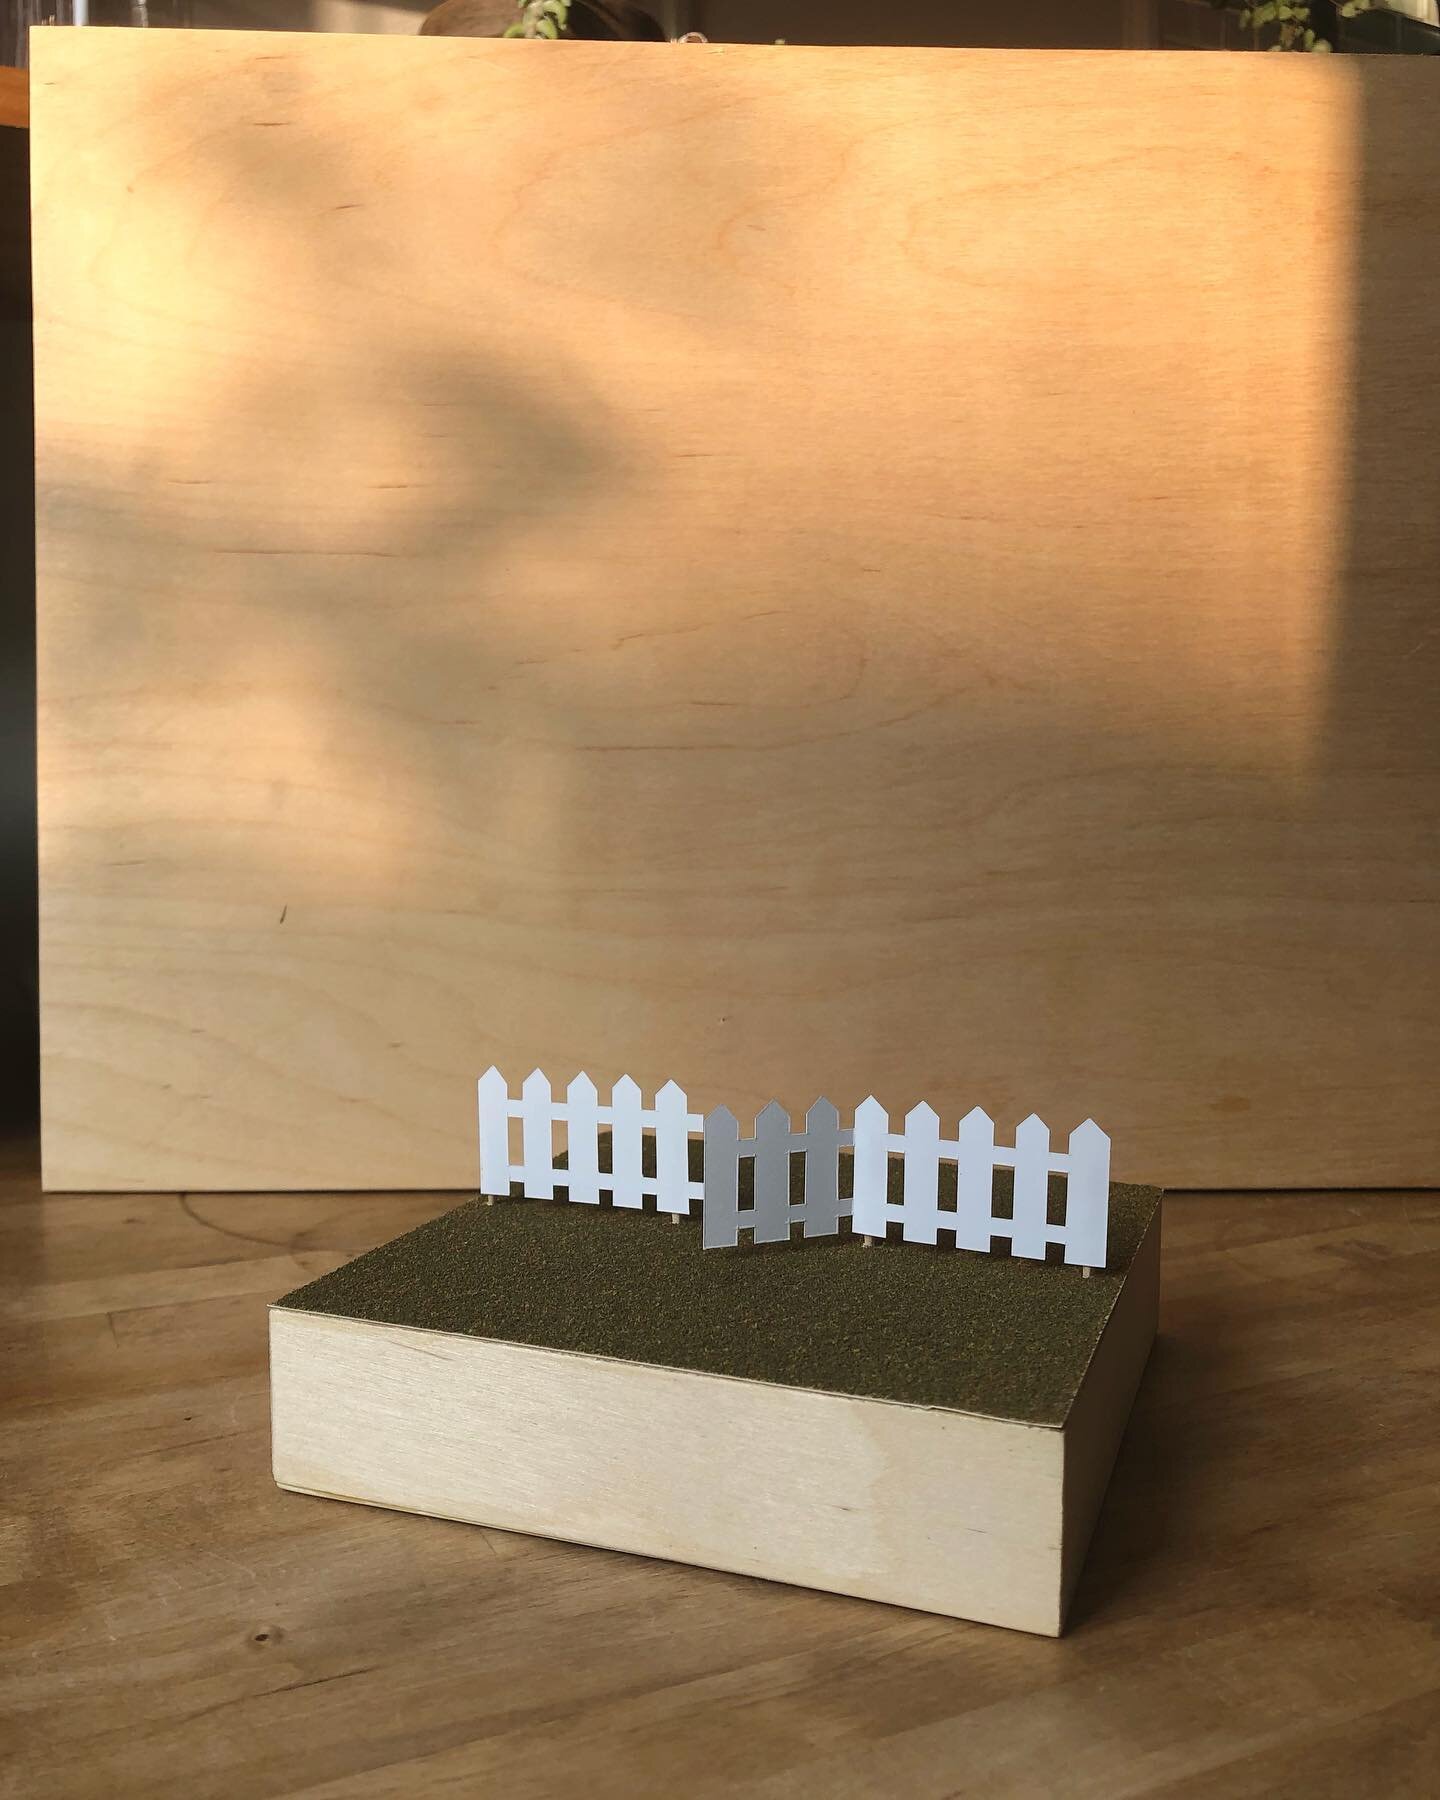 Untitled (picket fence)
plywood, paper, model grass, toothpicks
2.25 x 5 x 5 inches